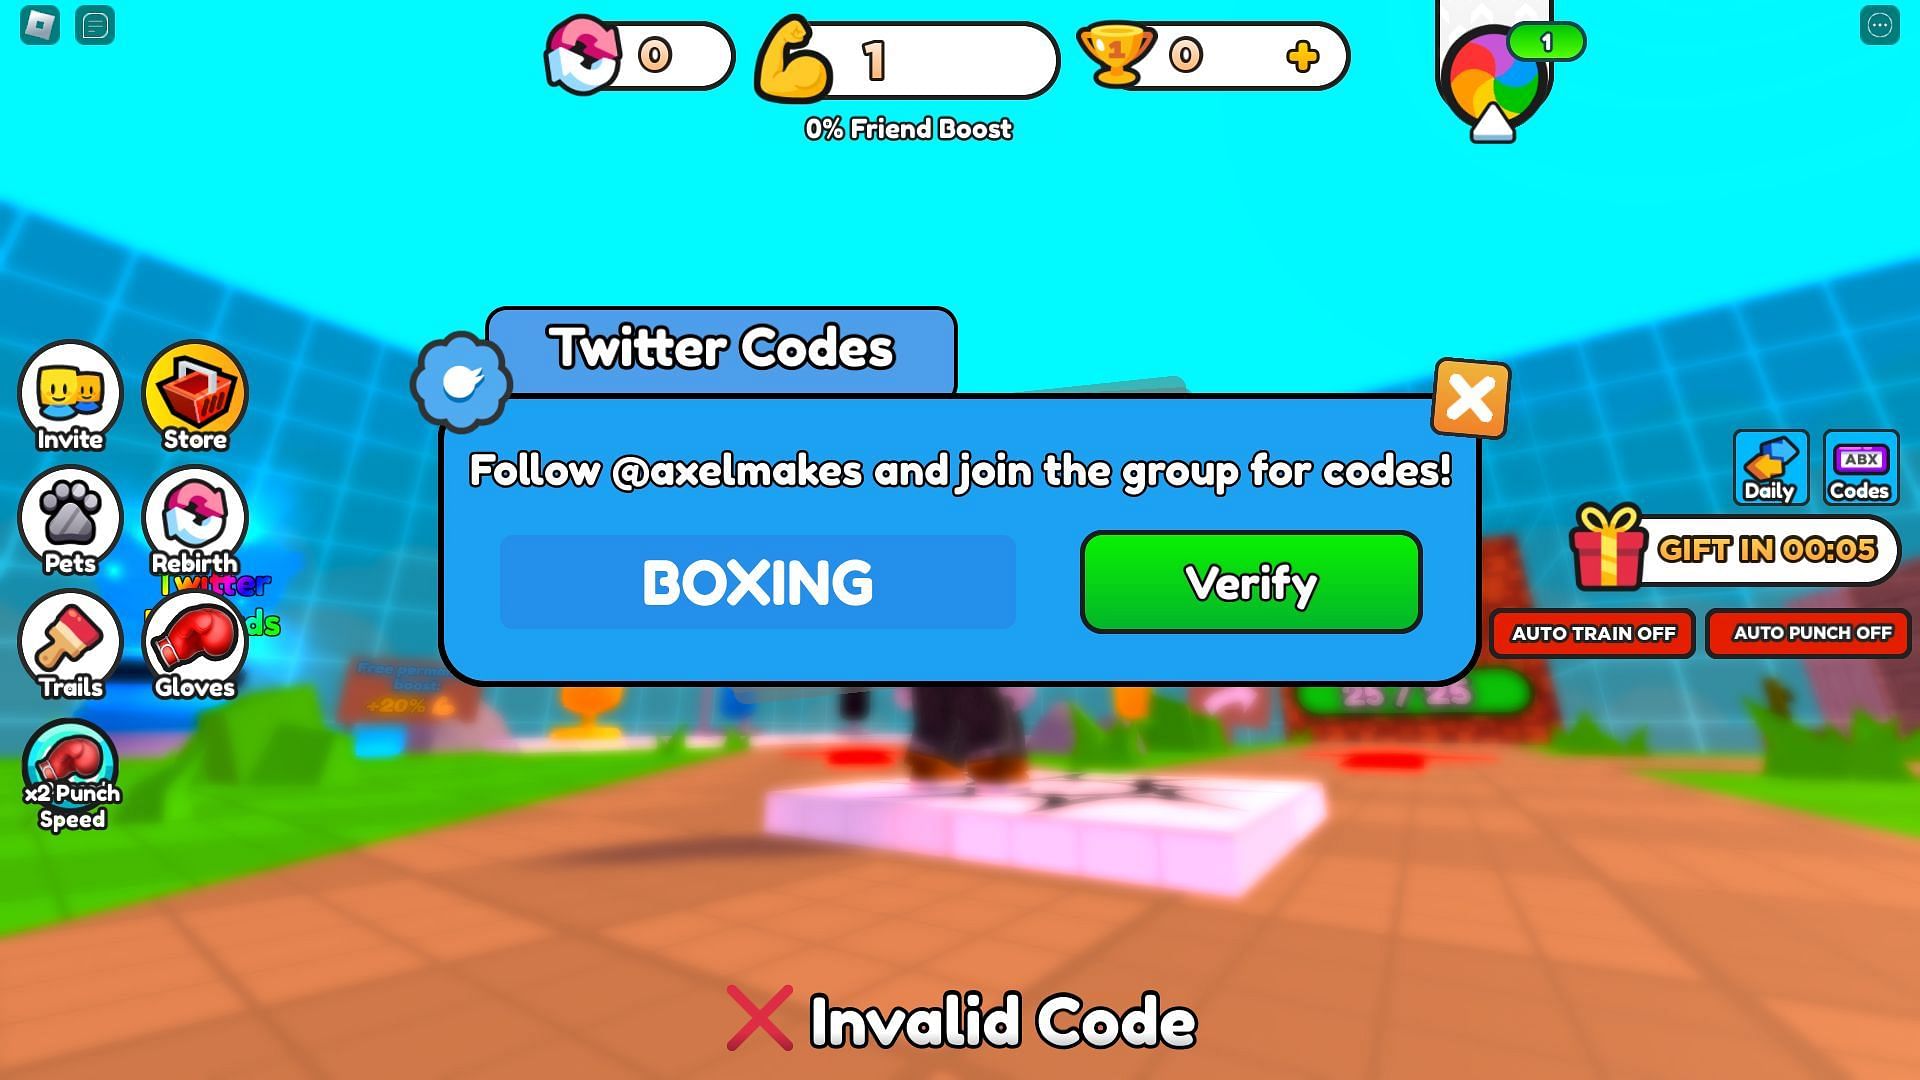 Troubleshooting codes for Punch Wall Simulator (Image via Roblox)